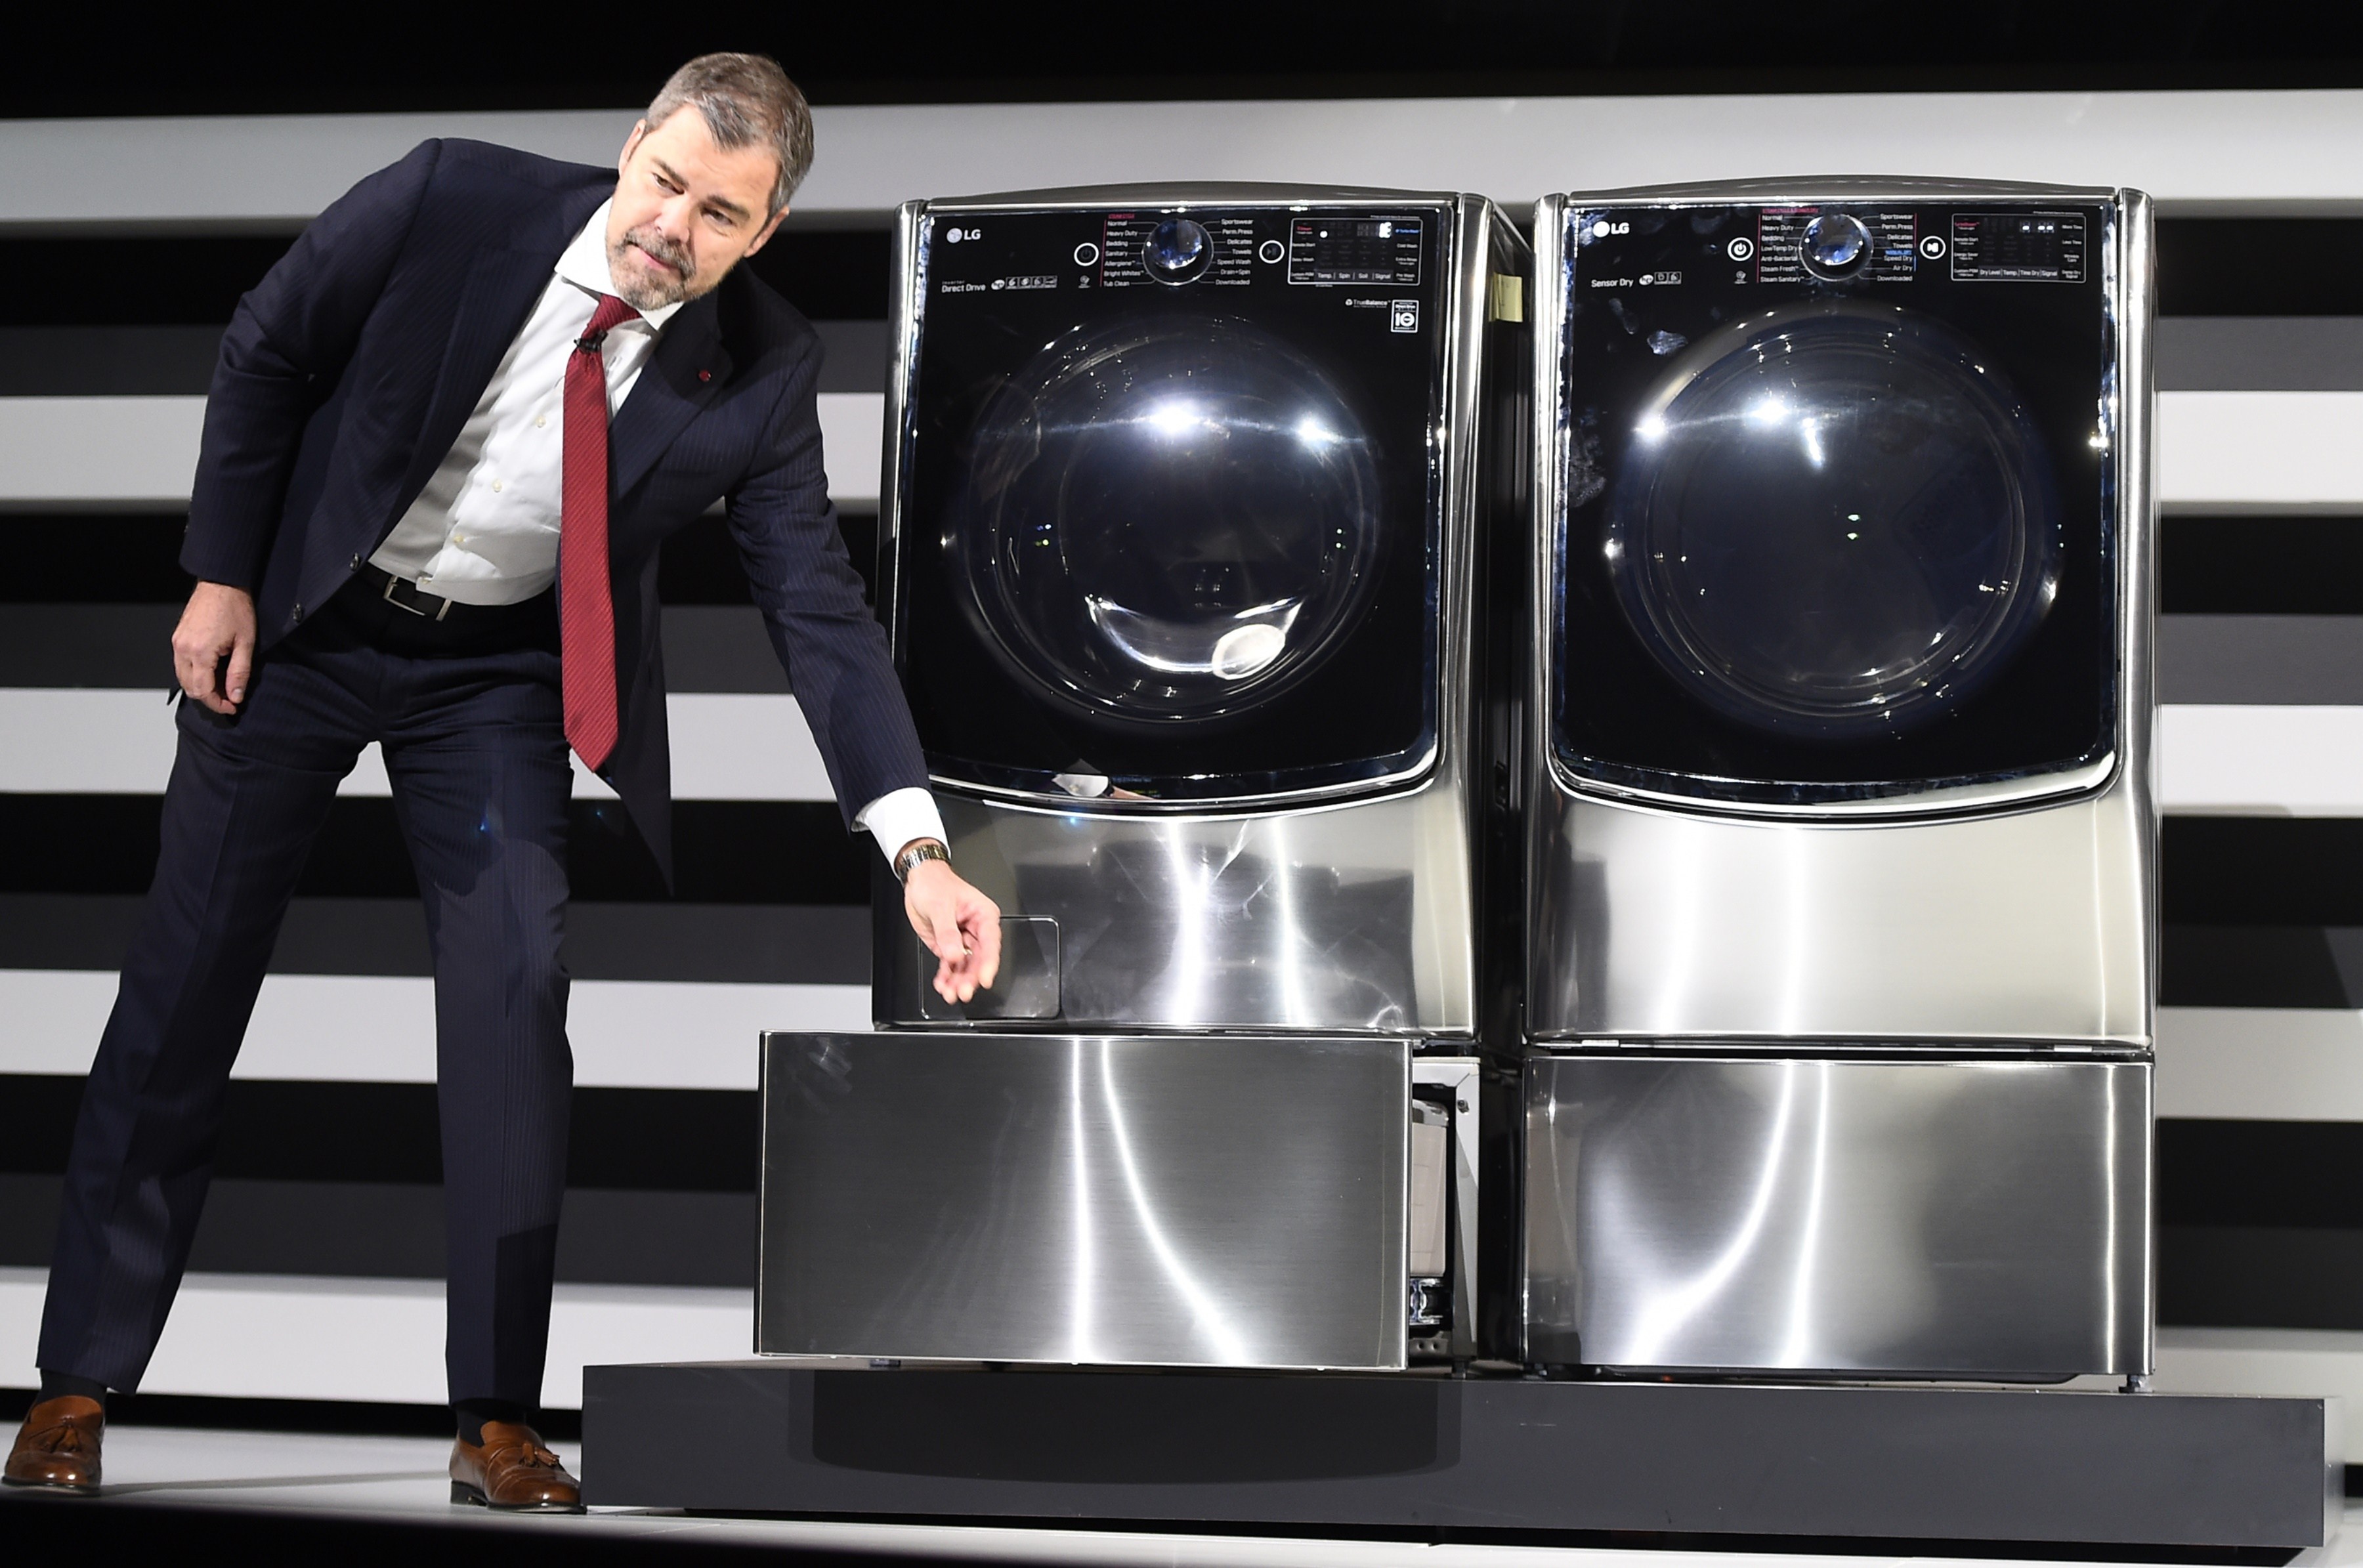 LG Electronic's David VanderWall introduces the LG front loading washing machine with the new Twin Load System allowing the consumer to do two separate washing loads at the same time, at the LG press conference at 2015 Consumer Electronics Show in Las Vegas, Nevada on Jan. 5, 2015. (Robyn Beck&mdash;AFP/Getty Images)